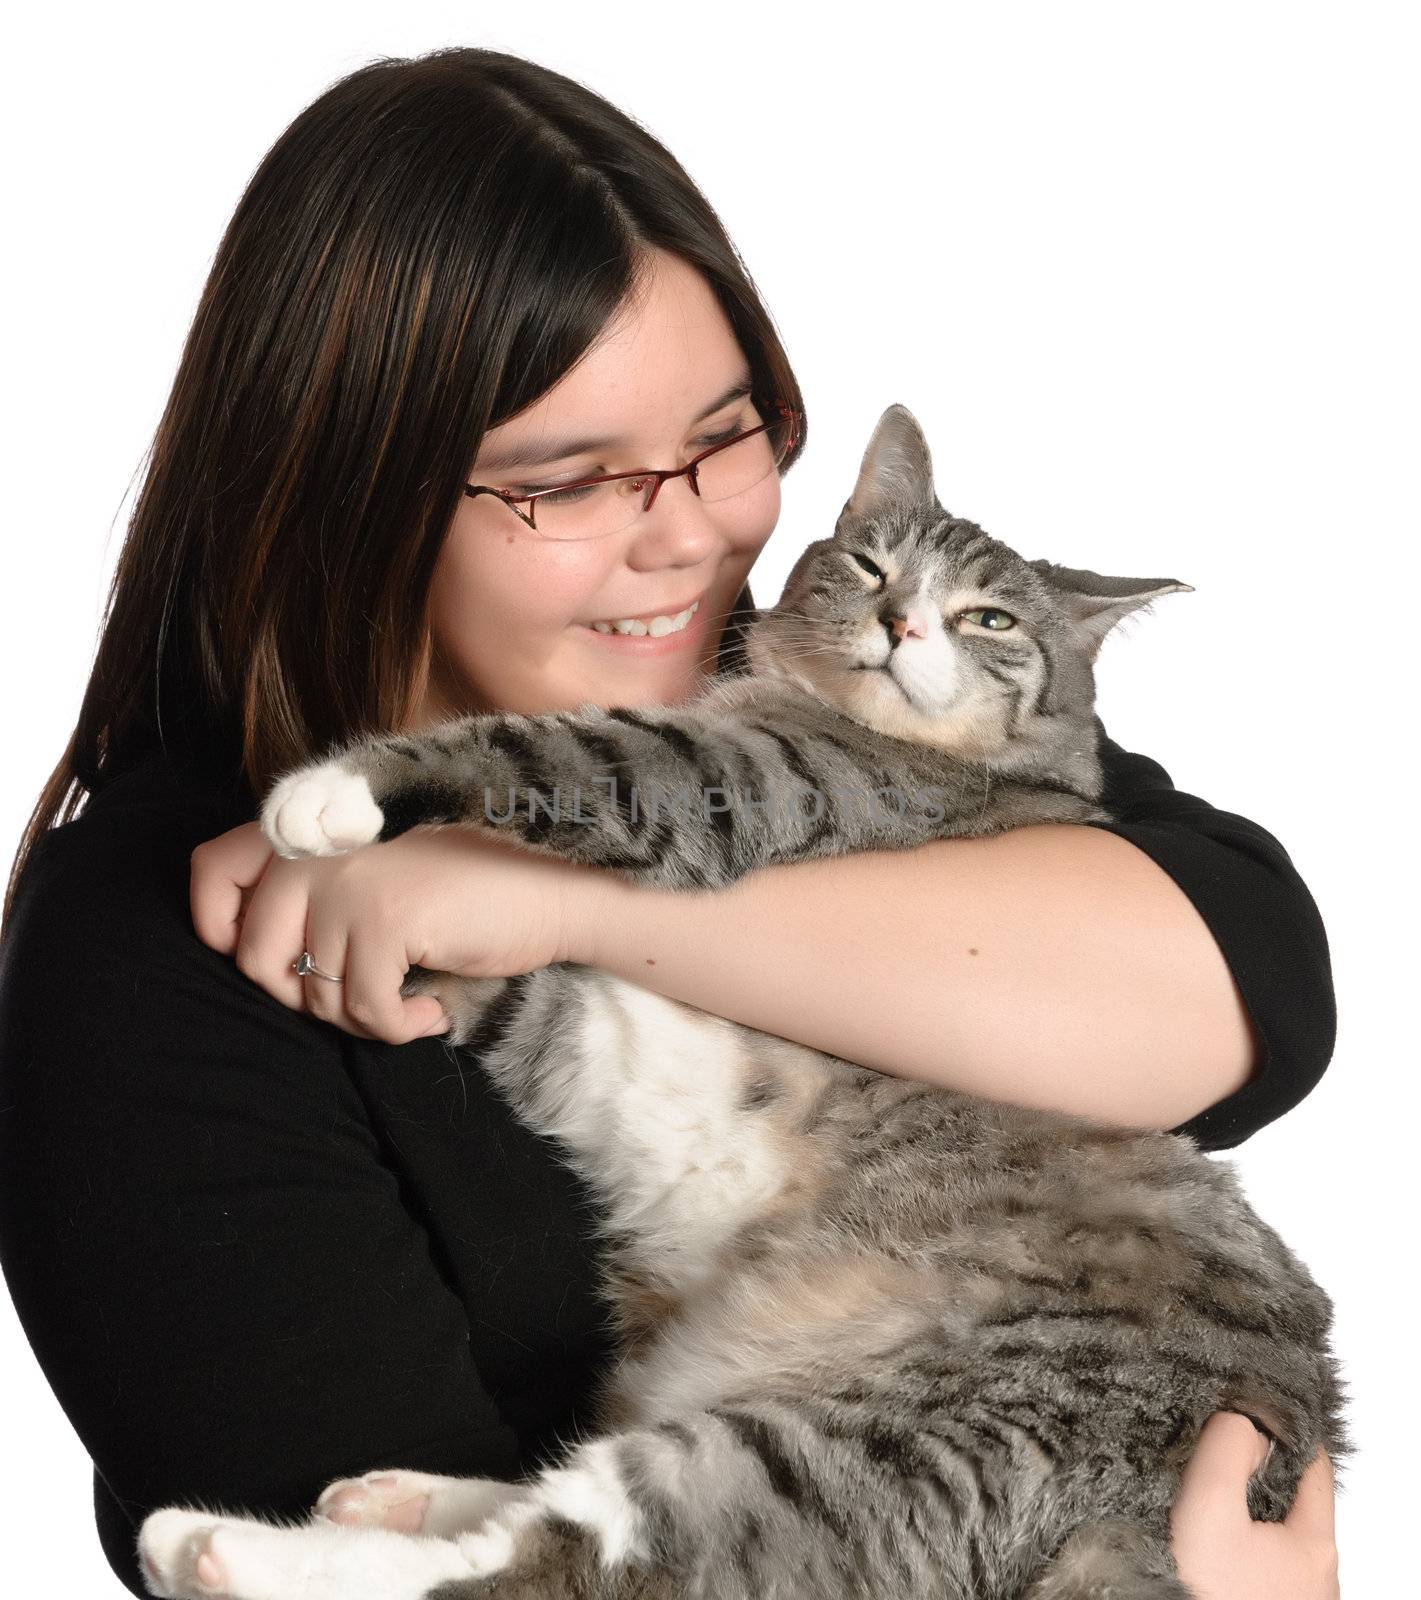 A young teen girl is loving and holding her pet cat, isolated against a white background.